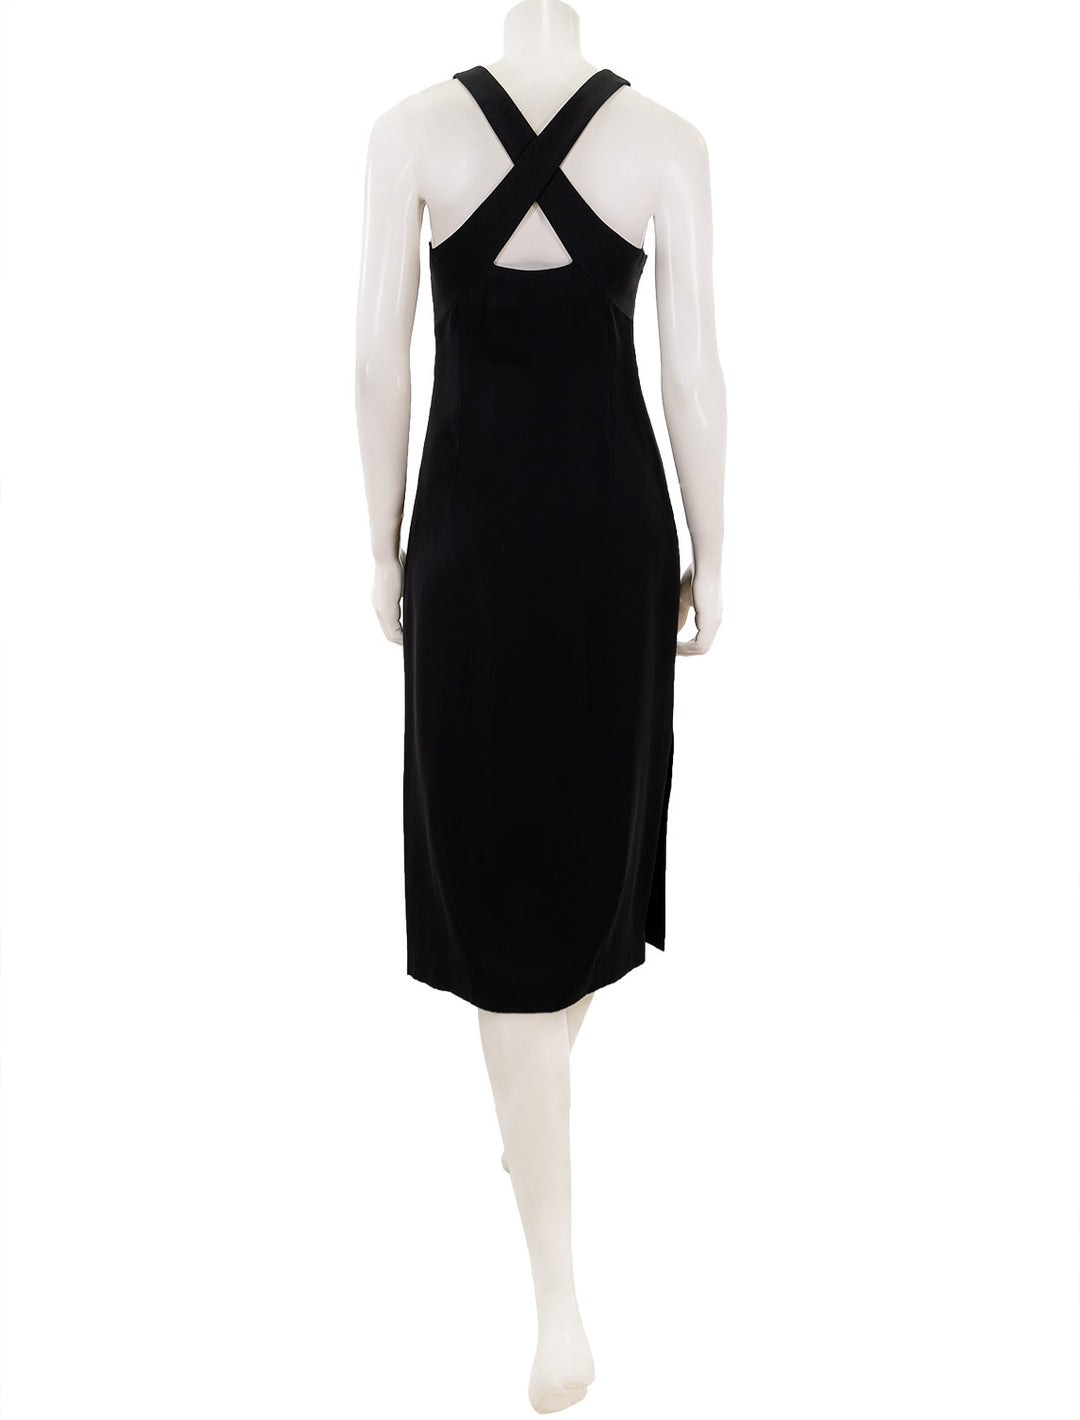 Back view of Theory's cross back midi dress in black.